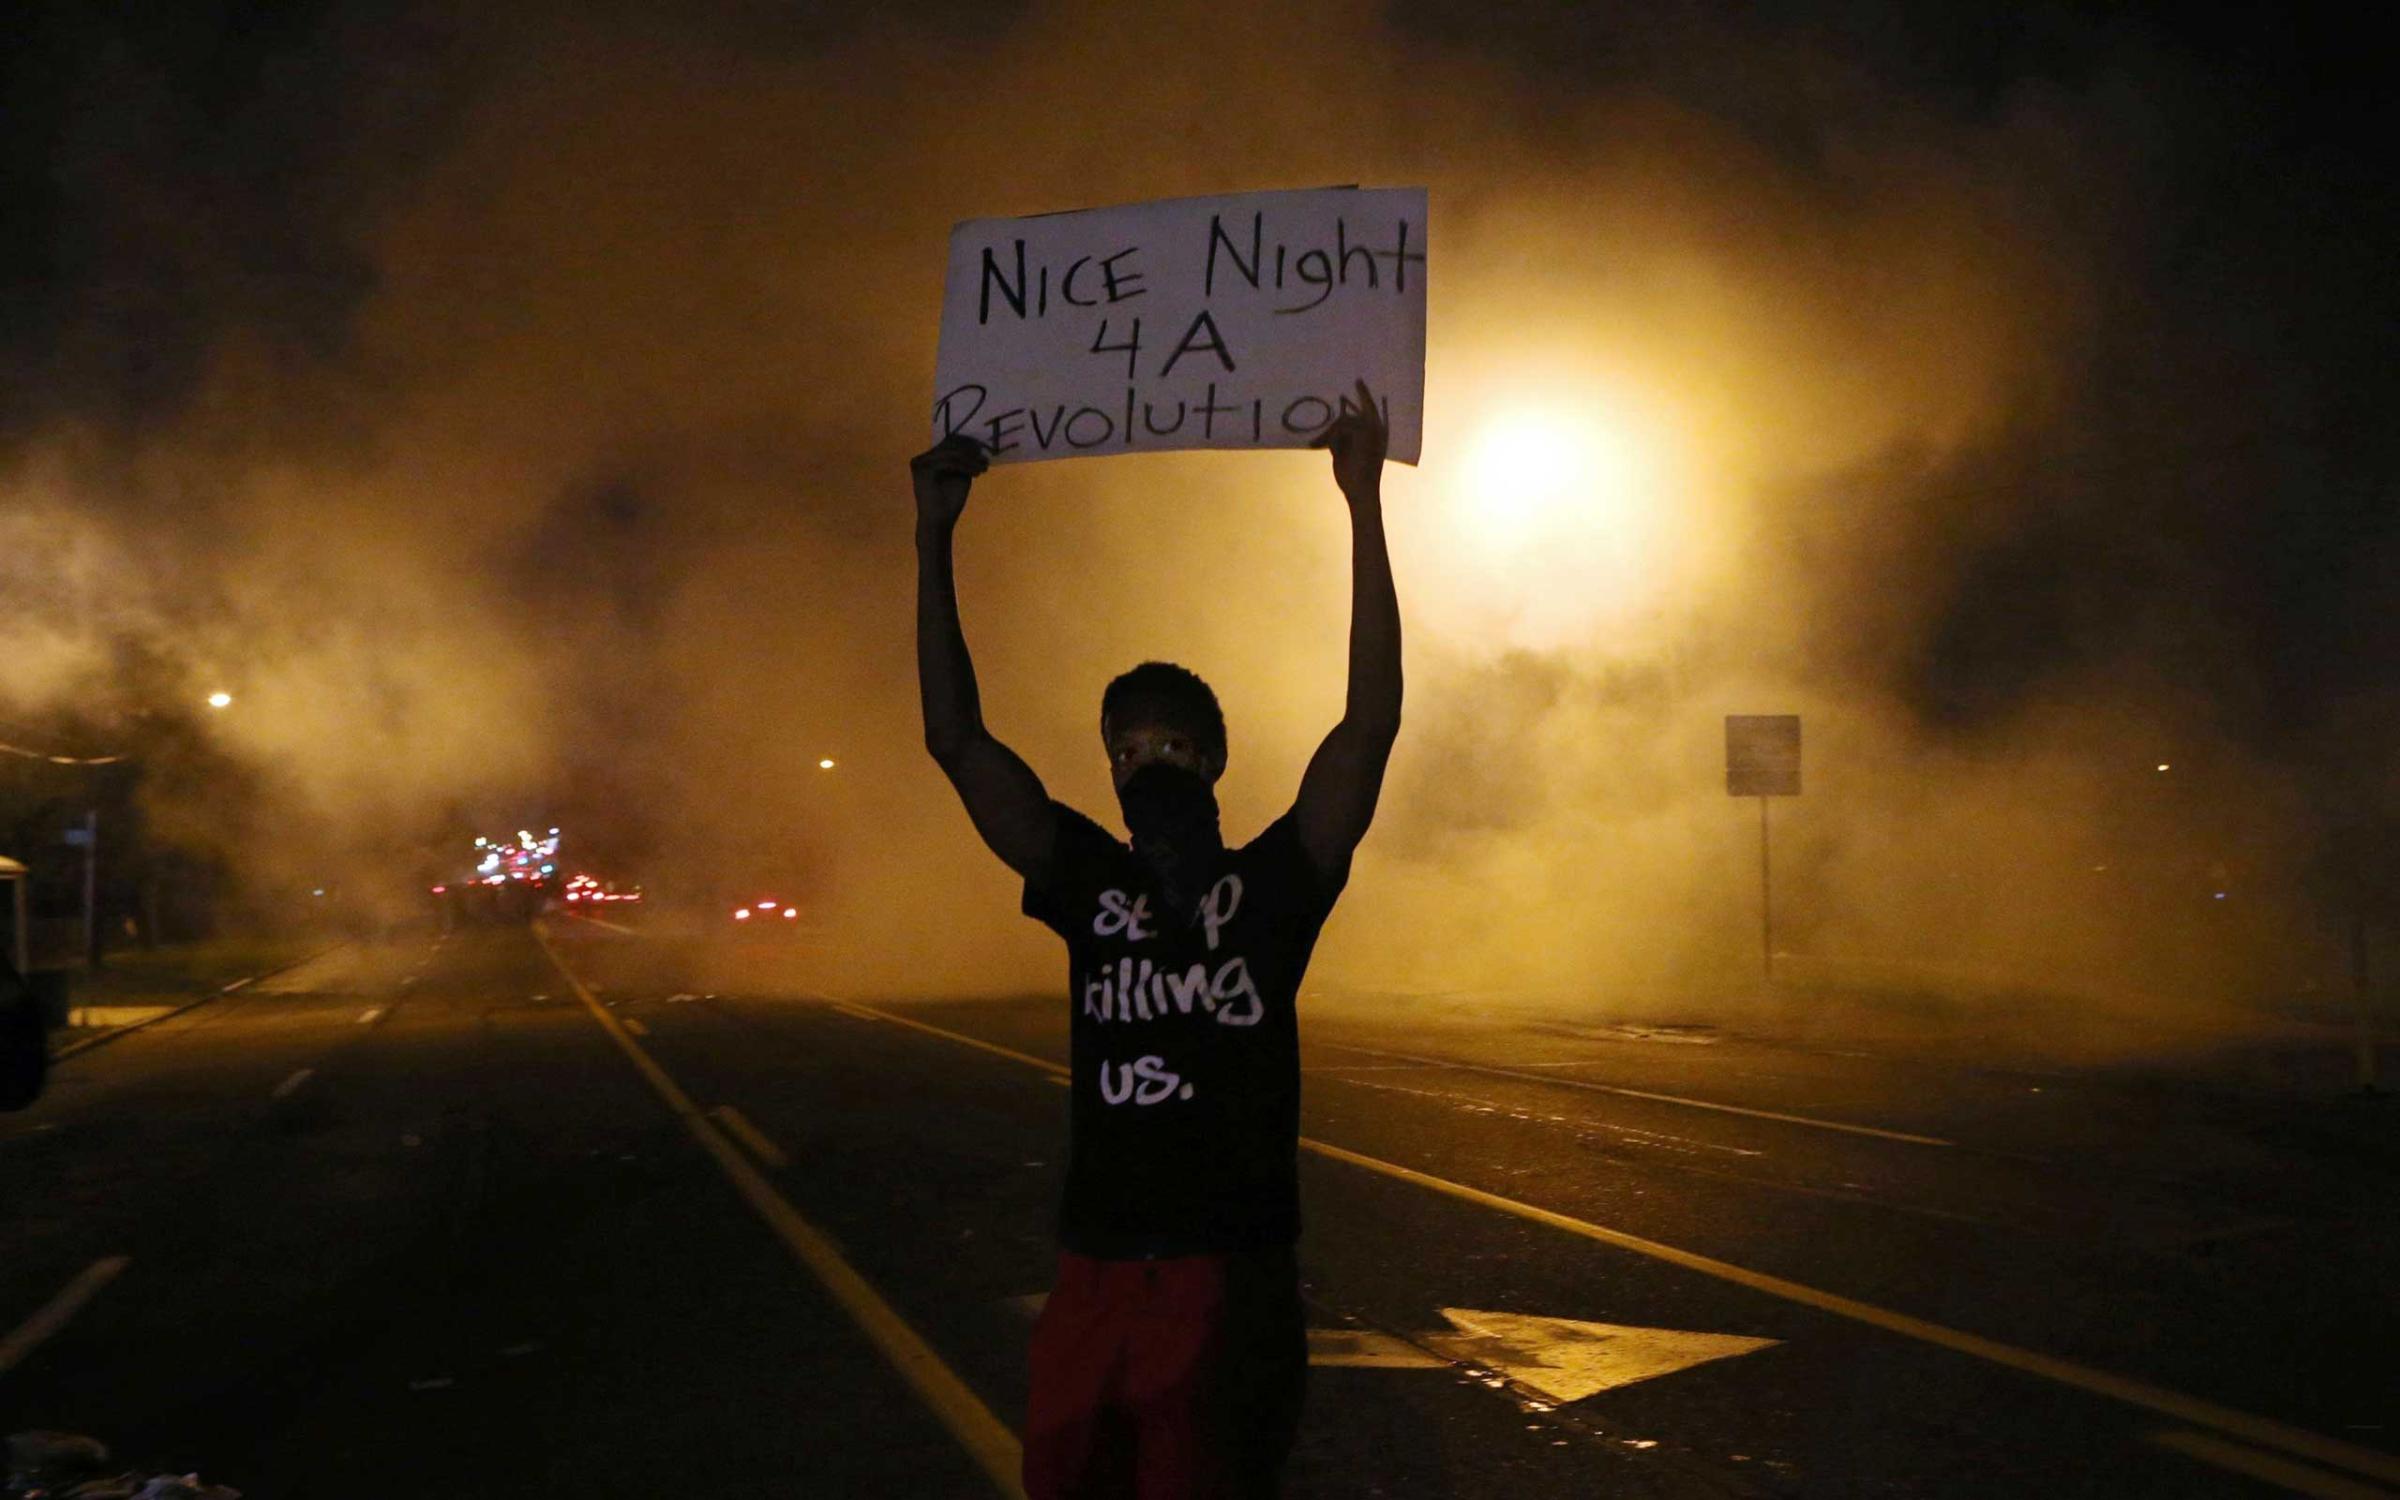 Aug. 17, 2014. A protester holds a sign towards the police after they shoot tear gas on W. Florissant in Ferguson. The protesters were throwing rocks and bottles towards the police.